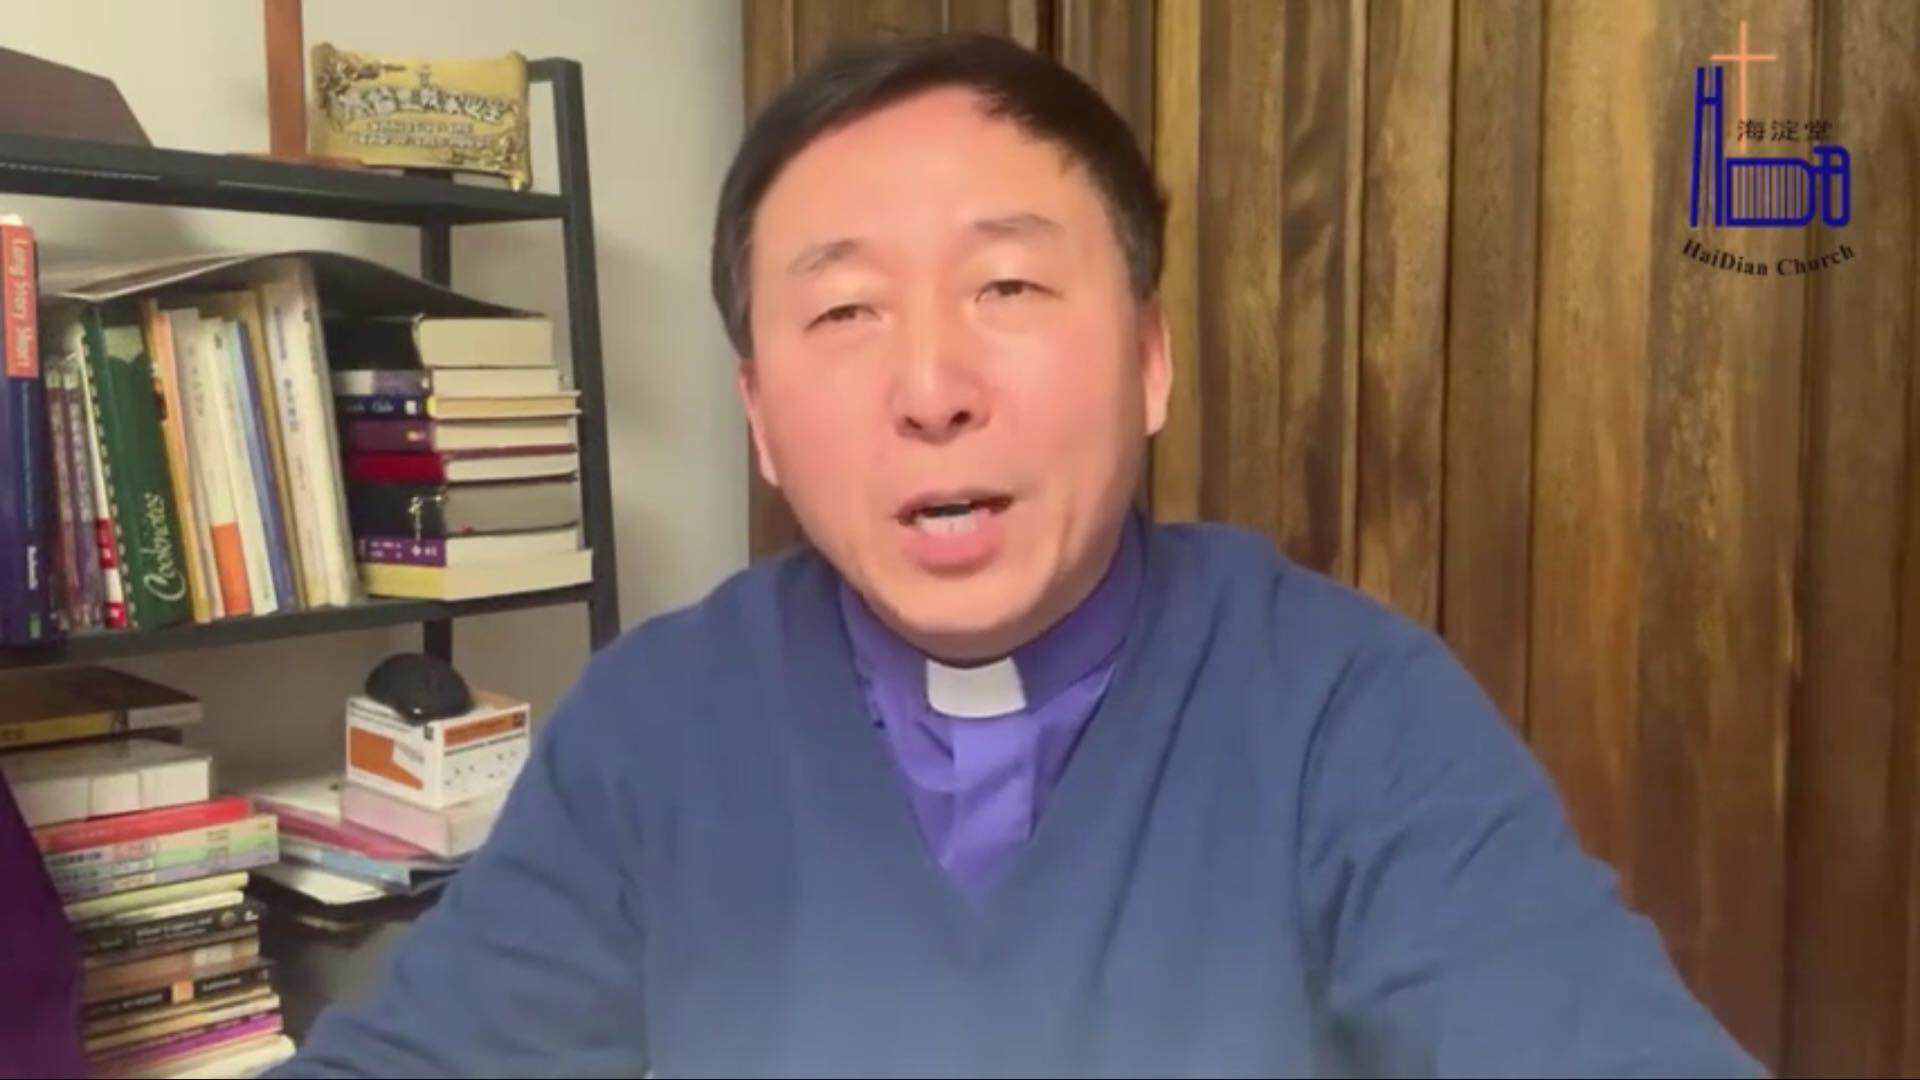 On Feruary 2, 2020, Rev. Wu Weiqing, senior pastor of Beijing Haidian Church, preached an online sermon named "Abundance without Worry" on the church's official WeChat account.